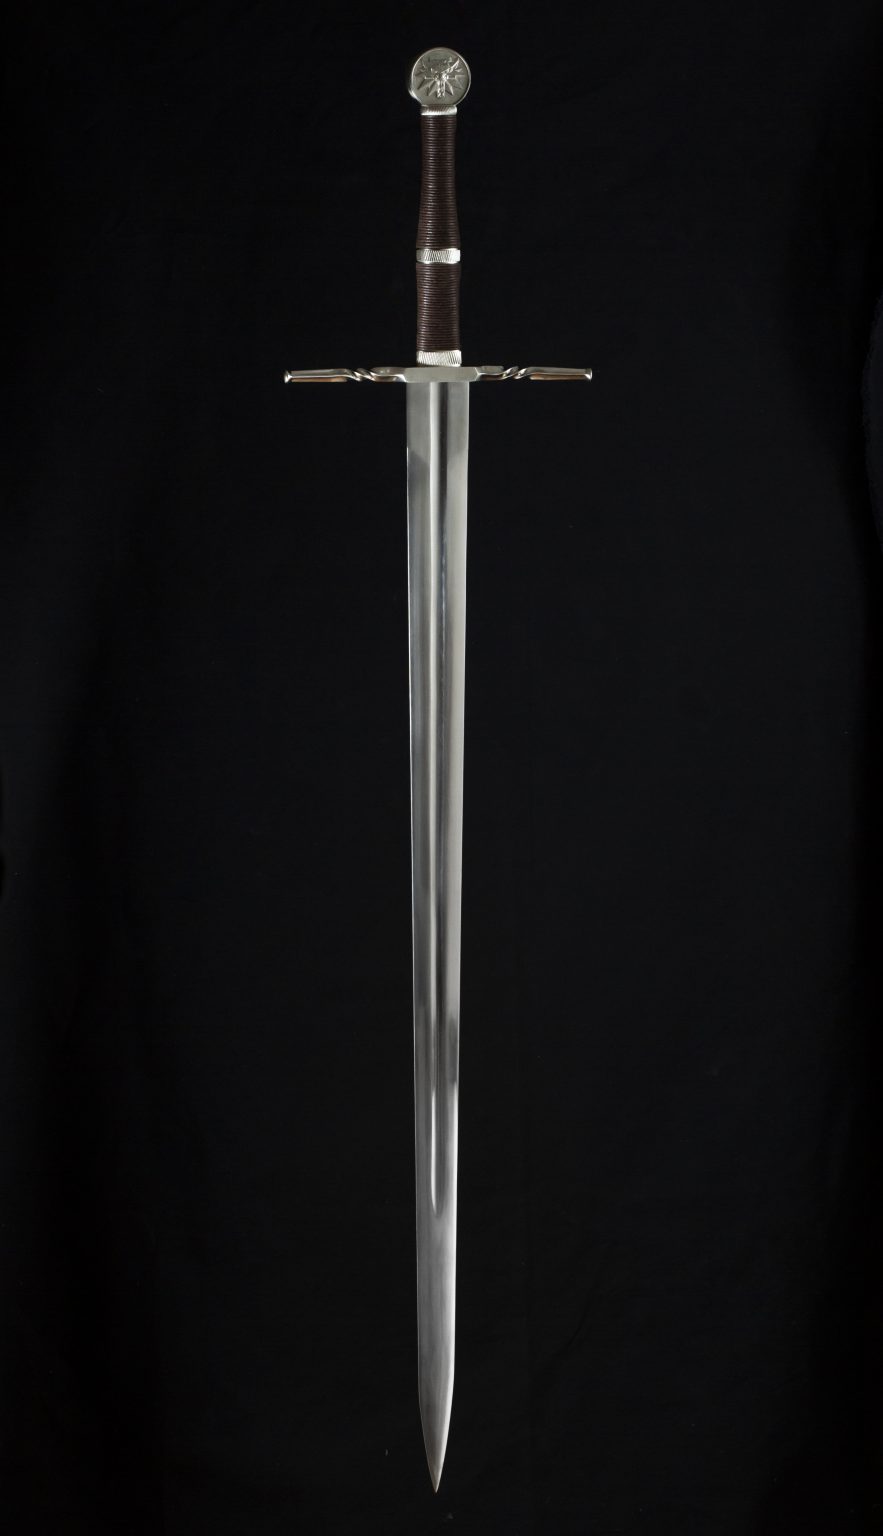 Witcher Wild Hunt Sword from The Witcher 3 series on Netflix